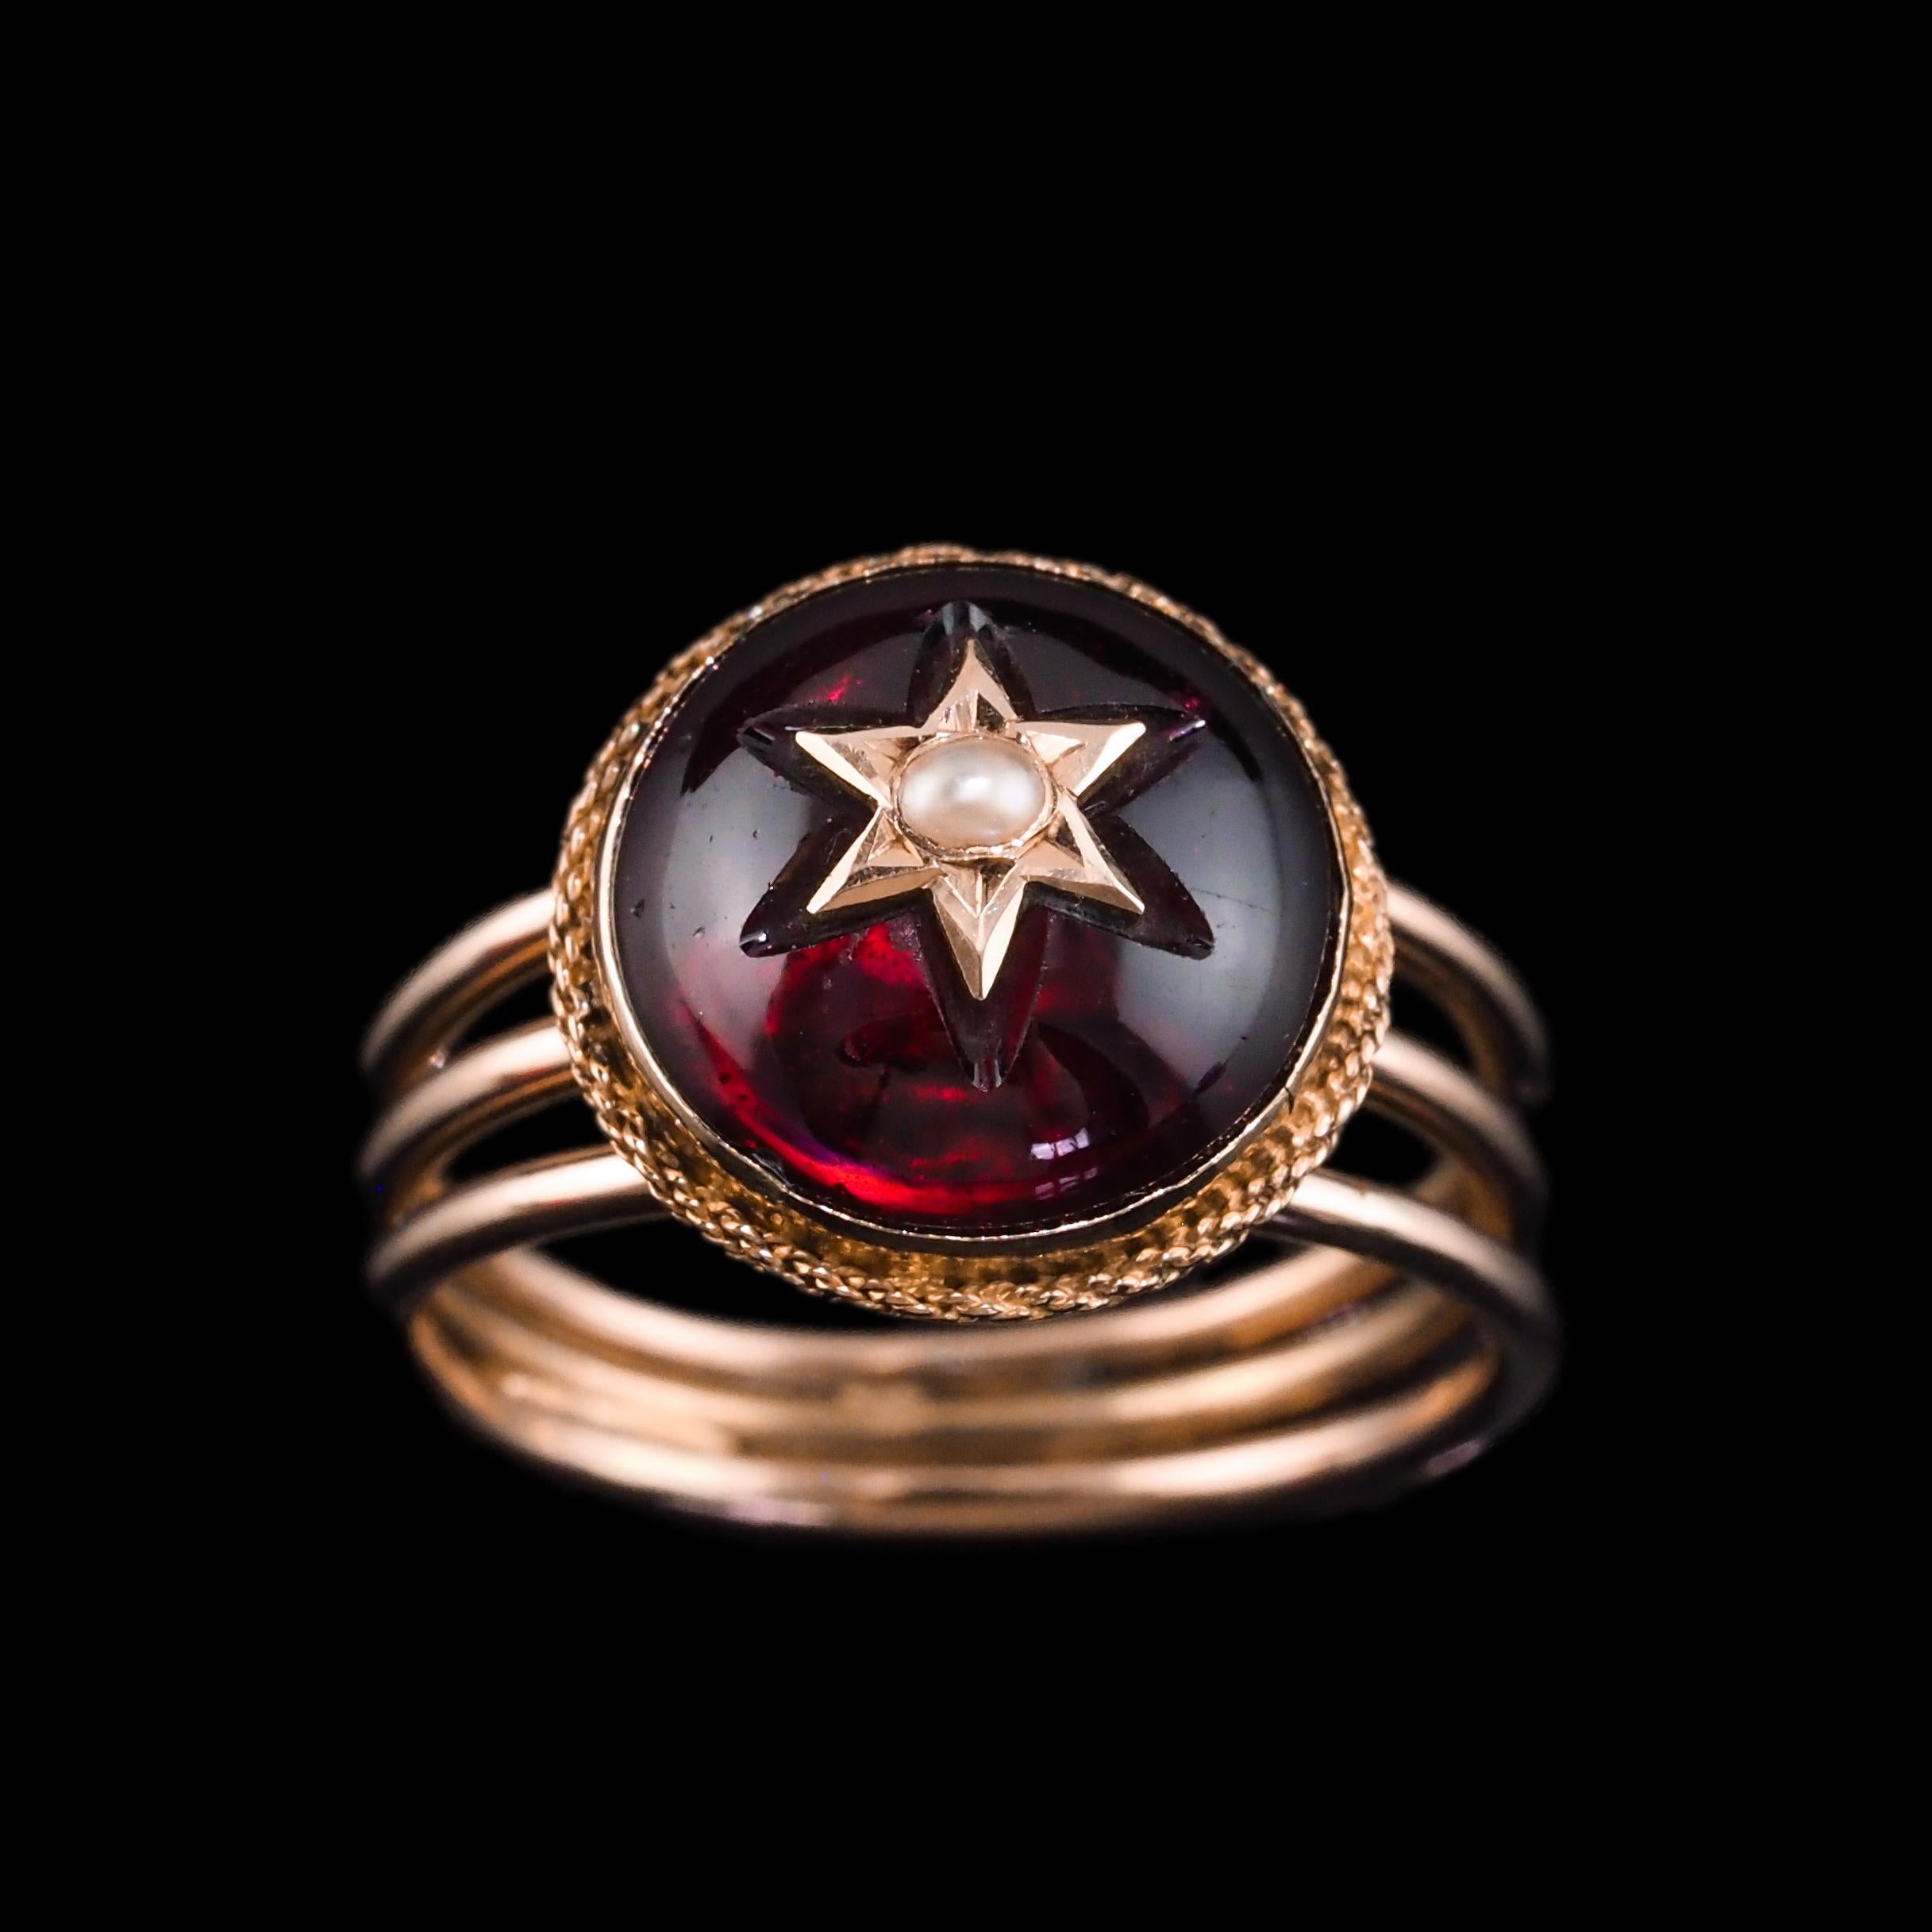 Women's or Men's Antique Victorian 14K Gold Garnet Star Cabochon Ring with Seed Pearl - c.1880 For Sale